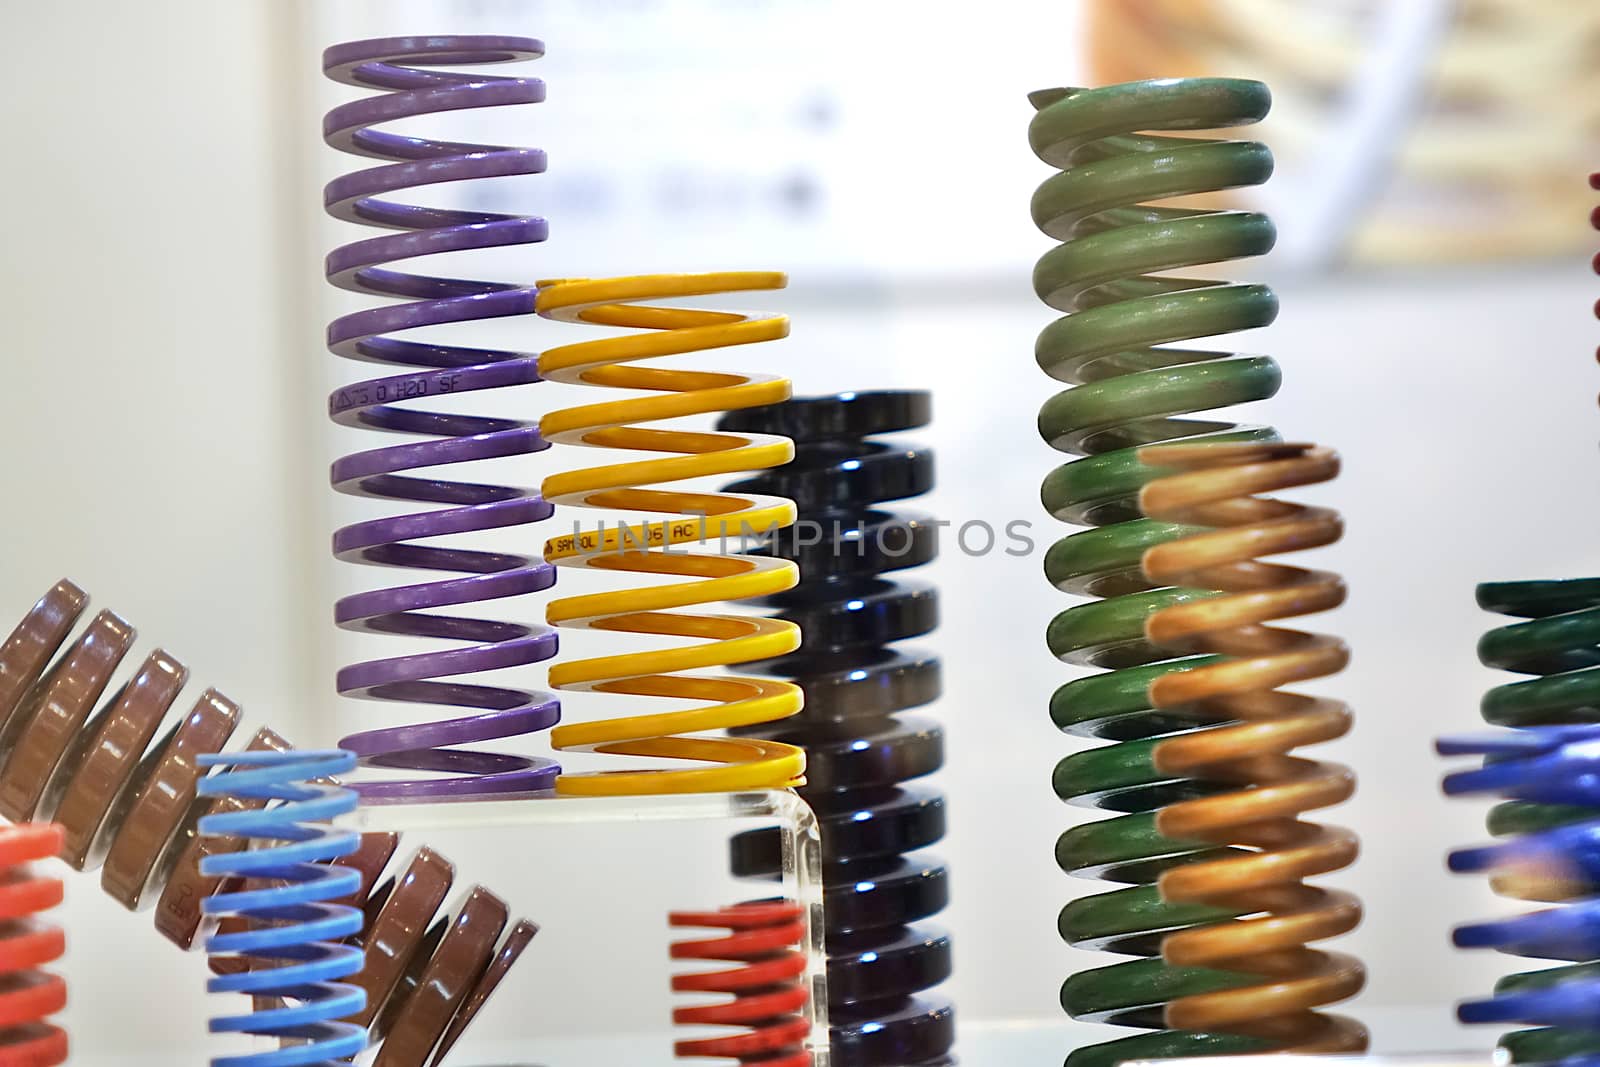 KAOHSIUNG, TAIWAN -- MARCH 30, 2019: Specialized coil springs are on display at a booth at an industrial fair.
